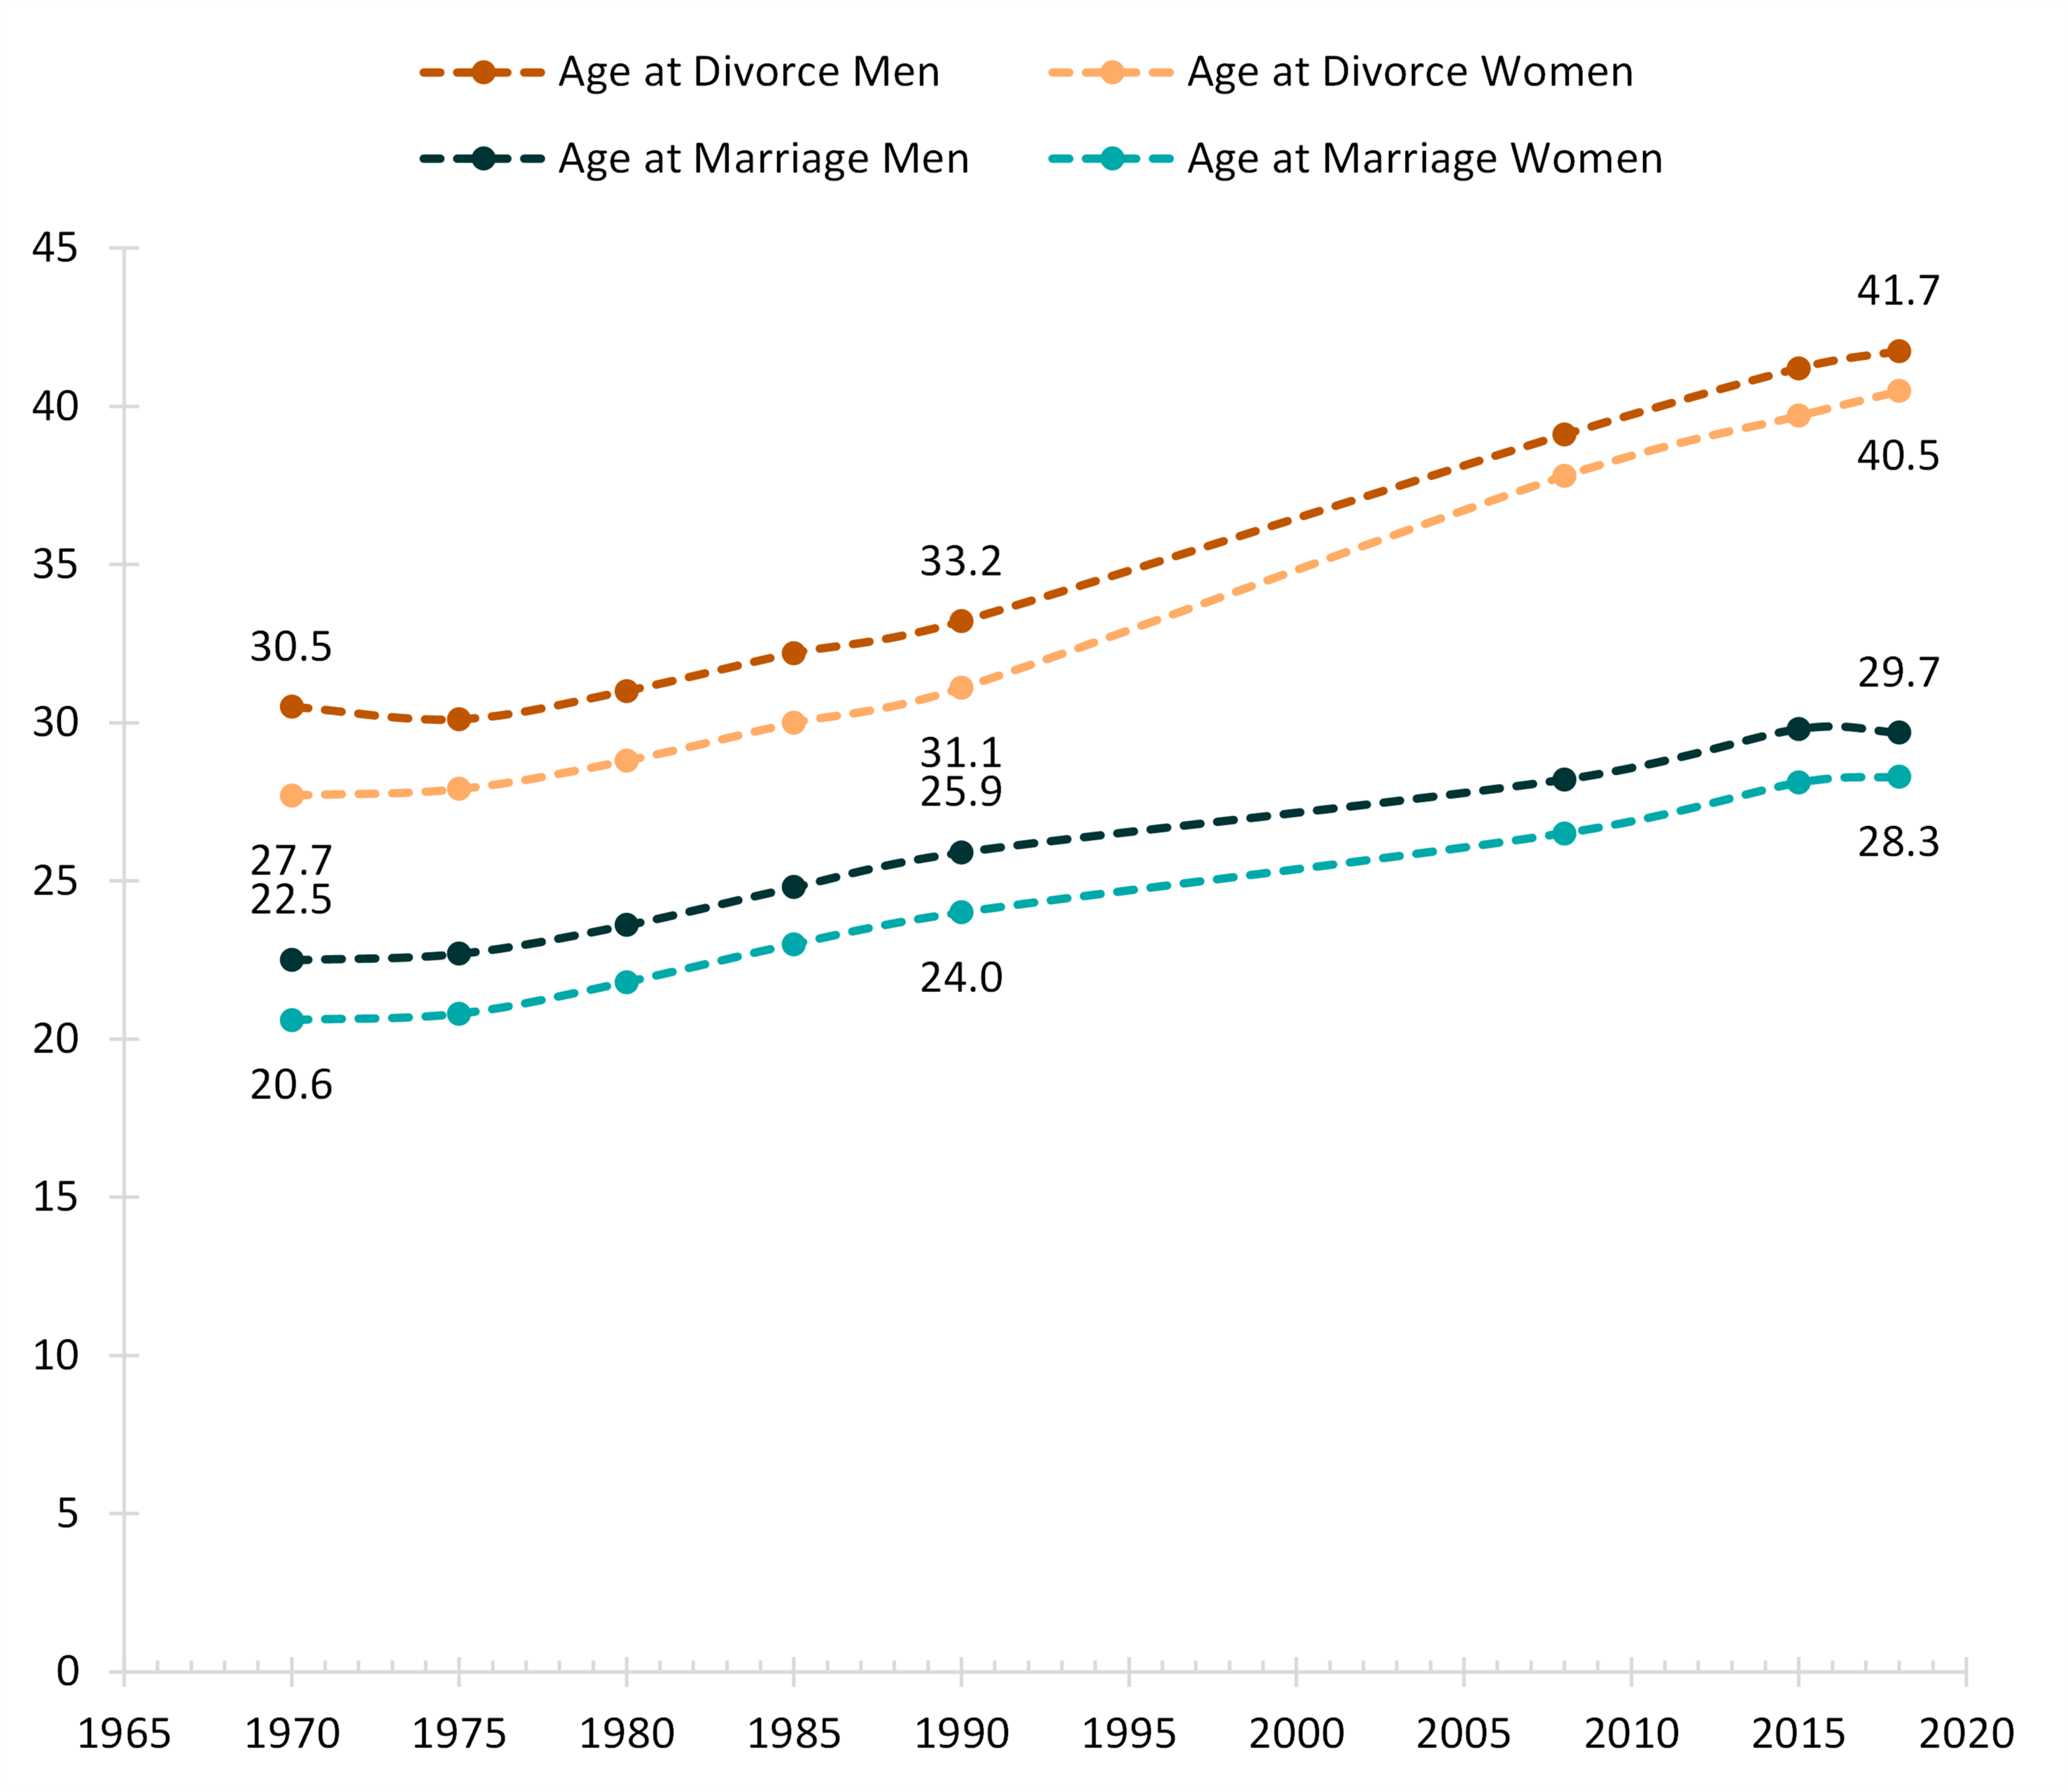 Figure 1. Median Ages at First Marriage and Divorce, 1970-2018